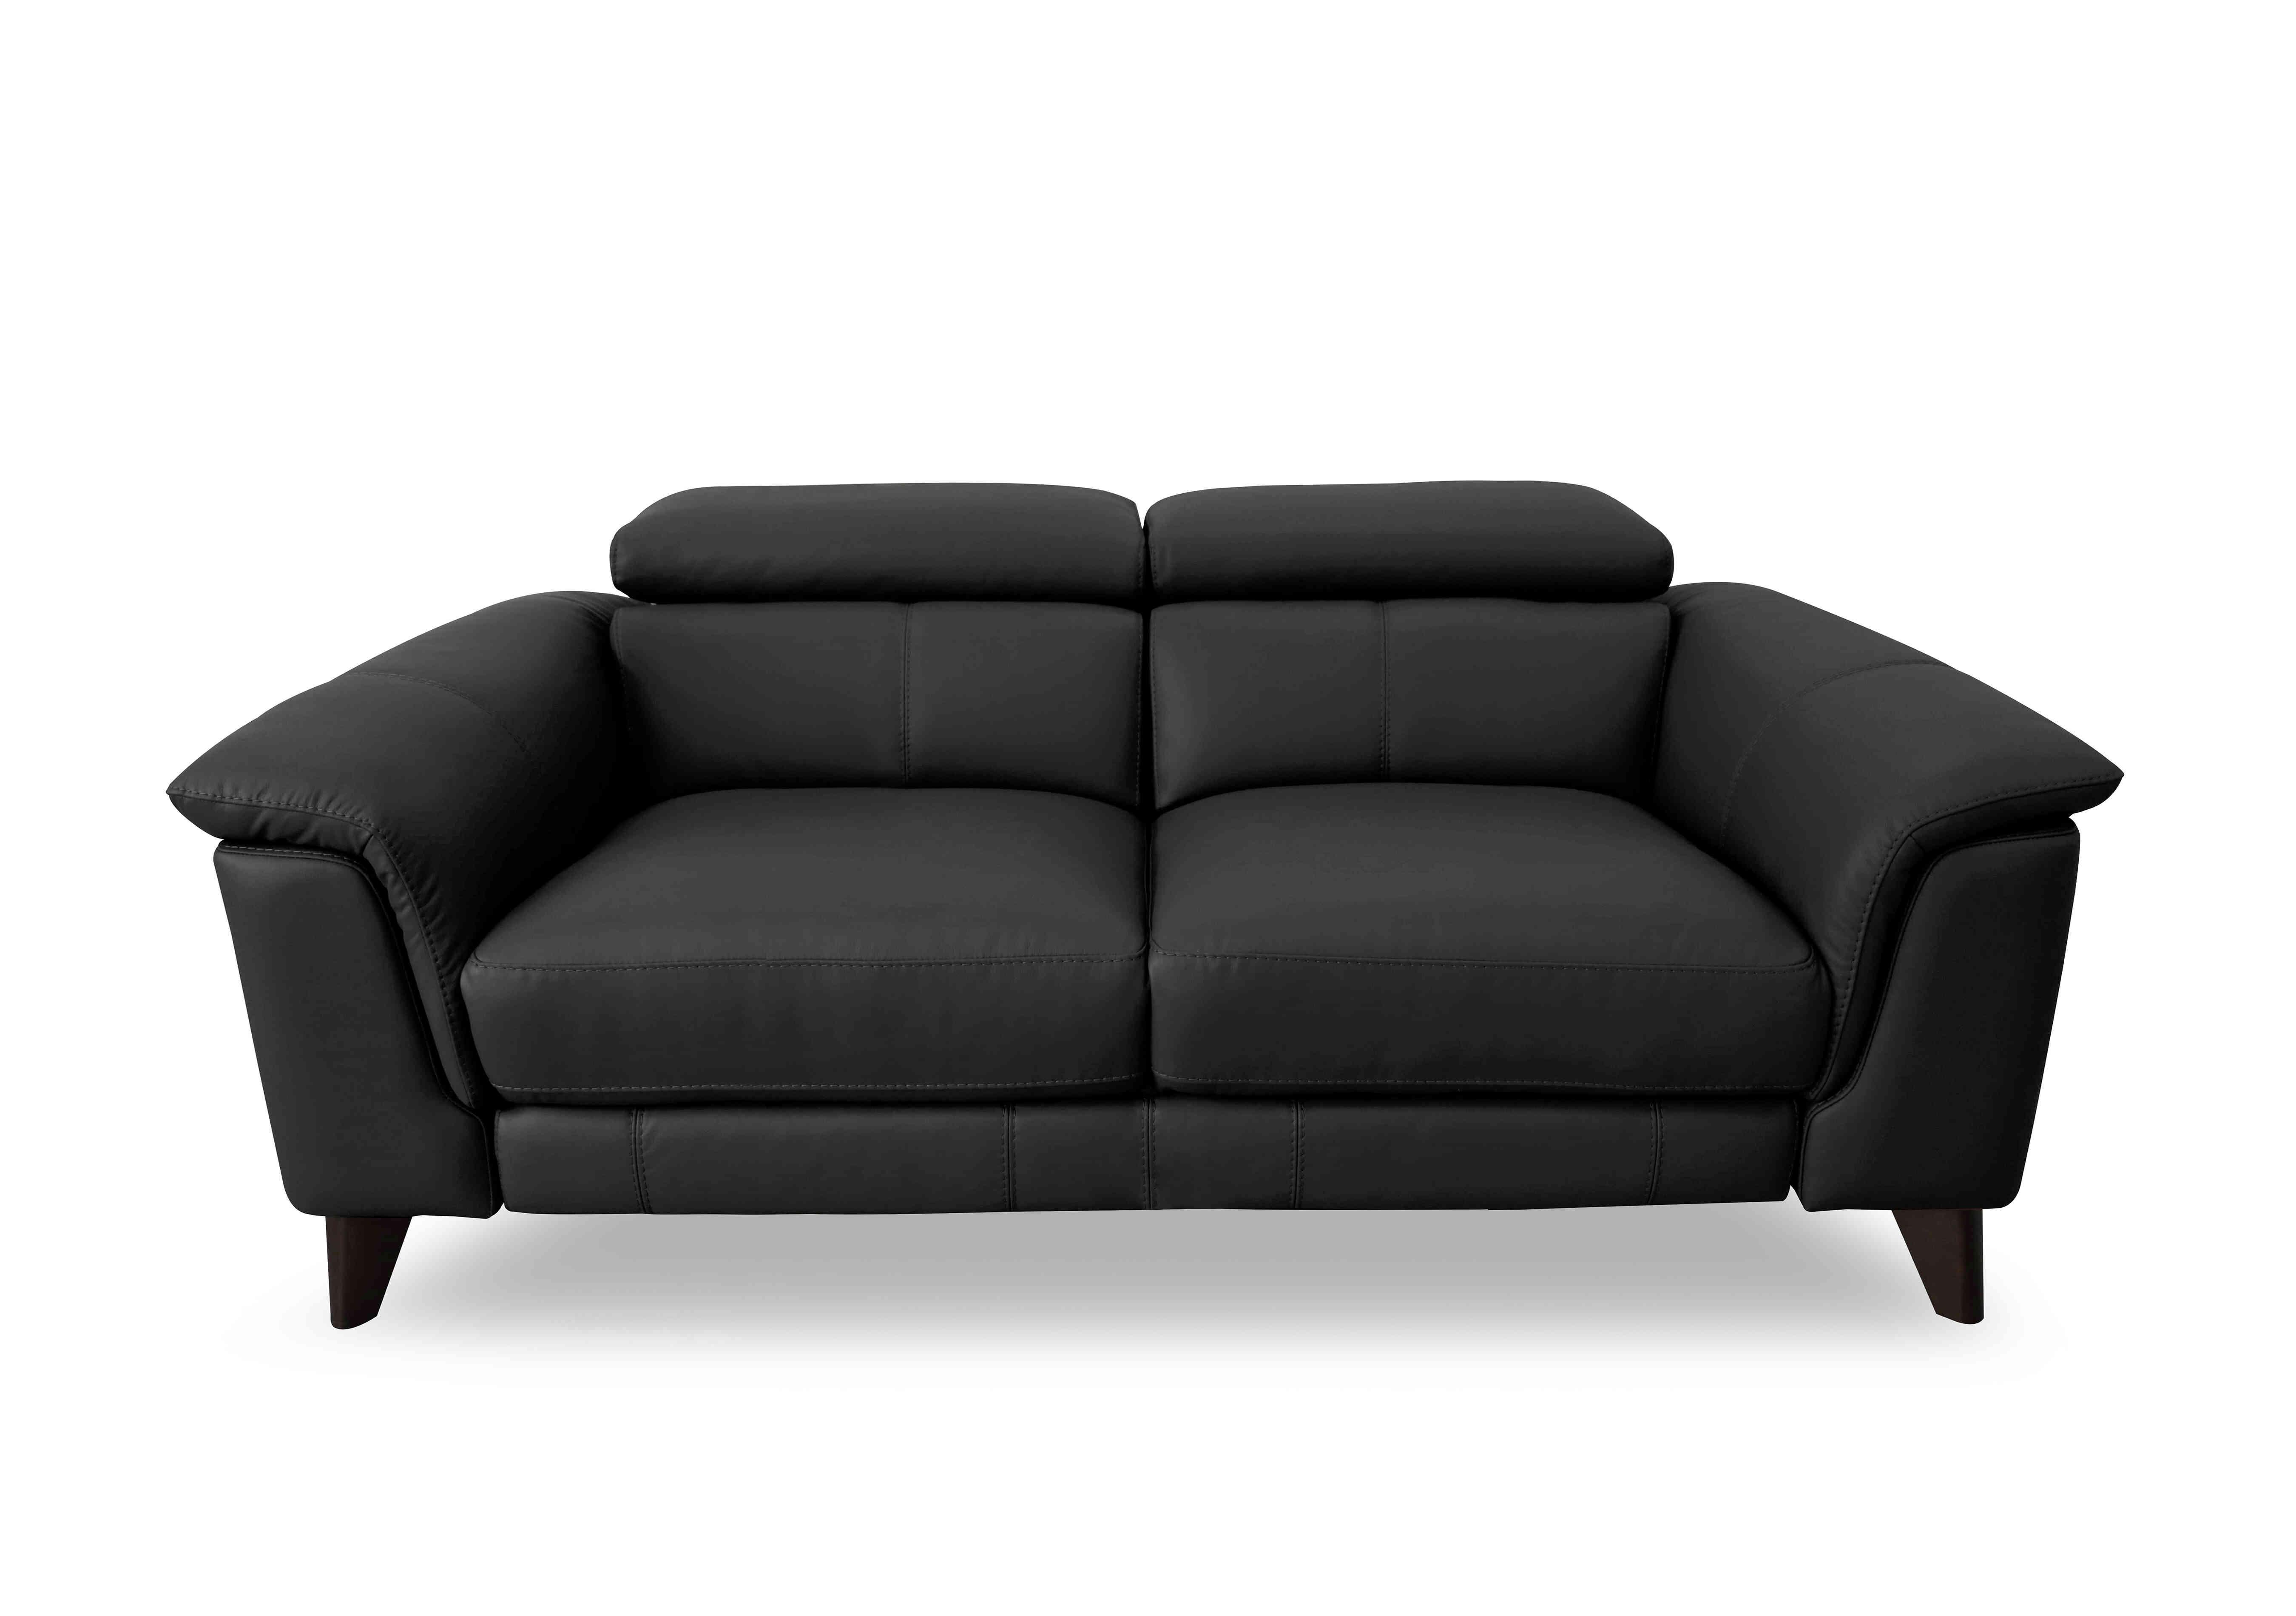 Wade 3 Seater Leather Sofa in Bv-3500 Classic Black on Furniture Village